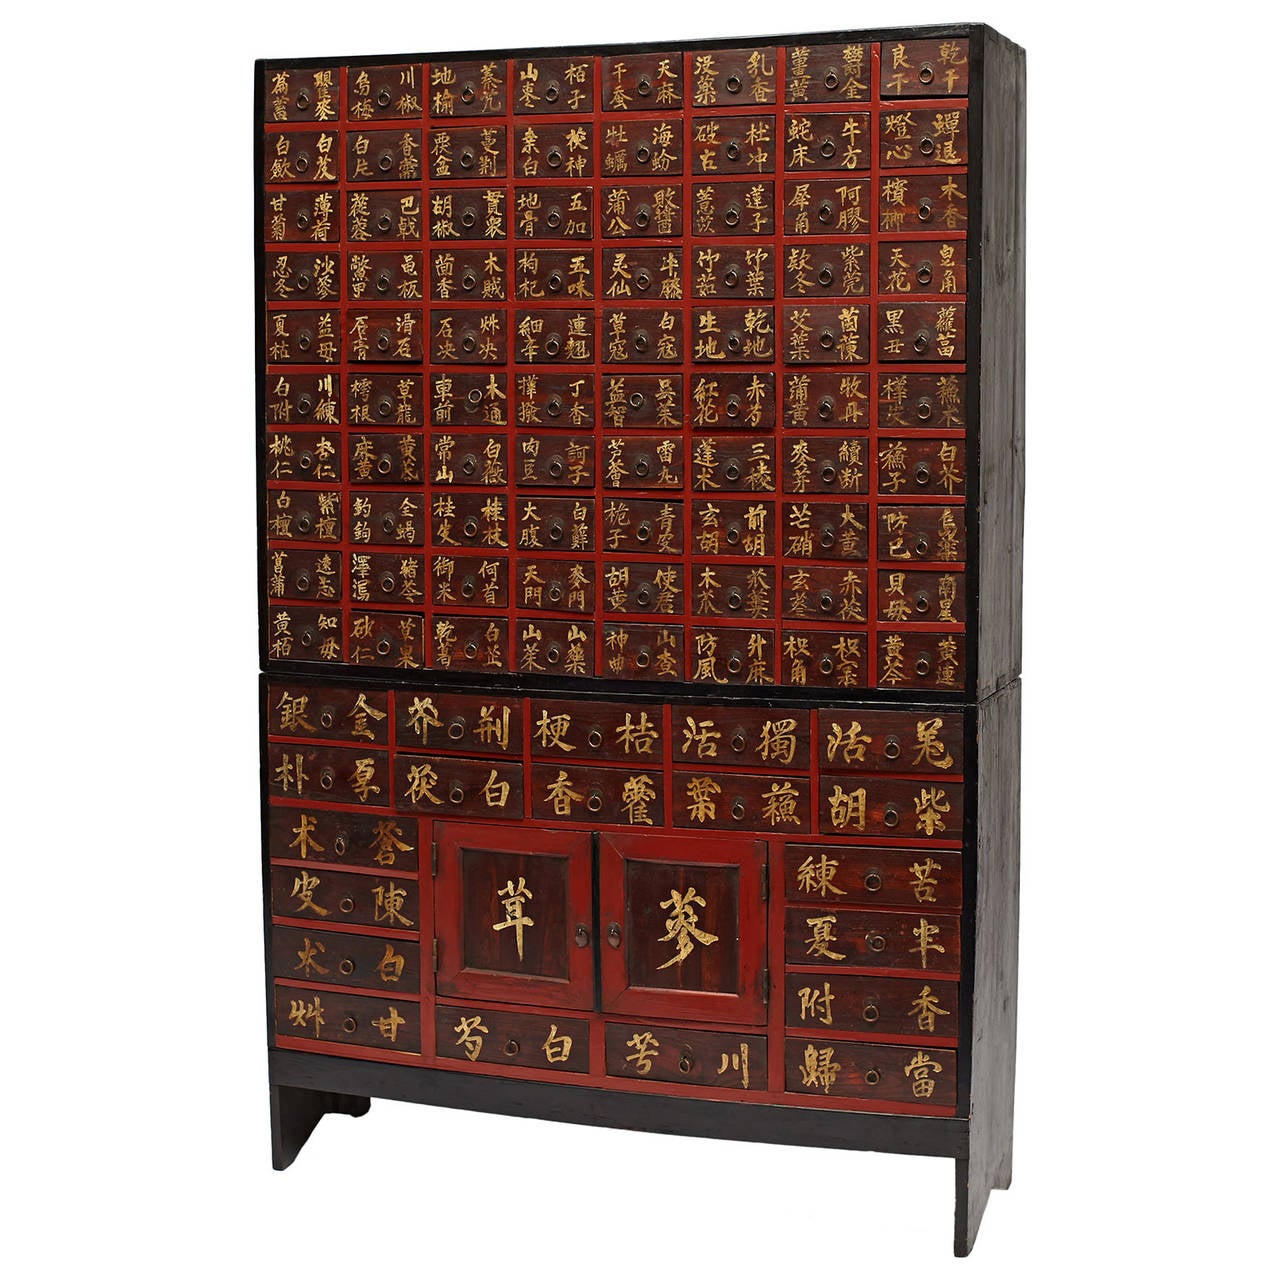 A gorgeous wood medicine chest in wonderful condition and vibrant color. Each drawer is inscribed in Chinese with different contents of herbs belonging in each drawer.